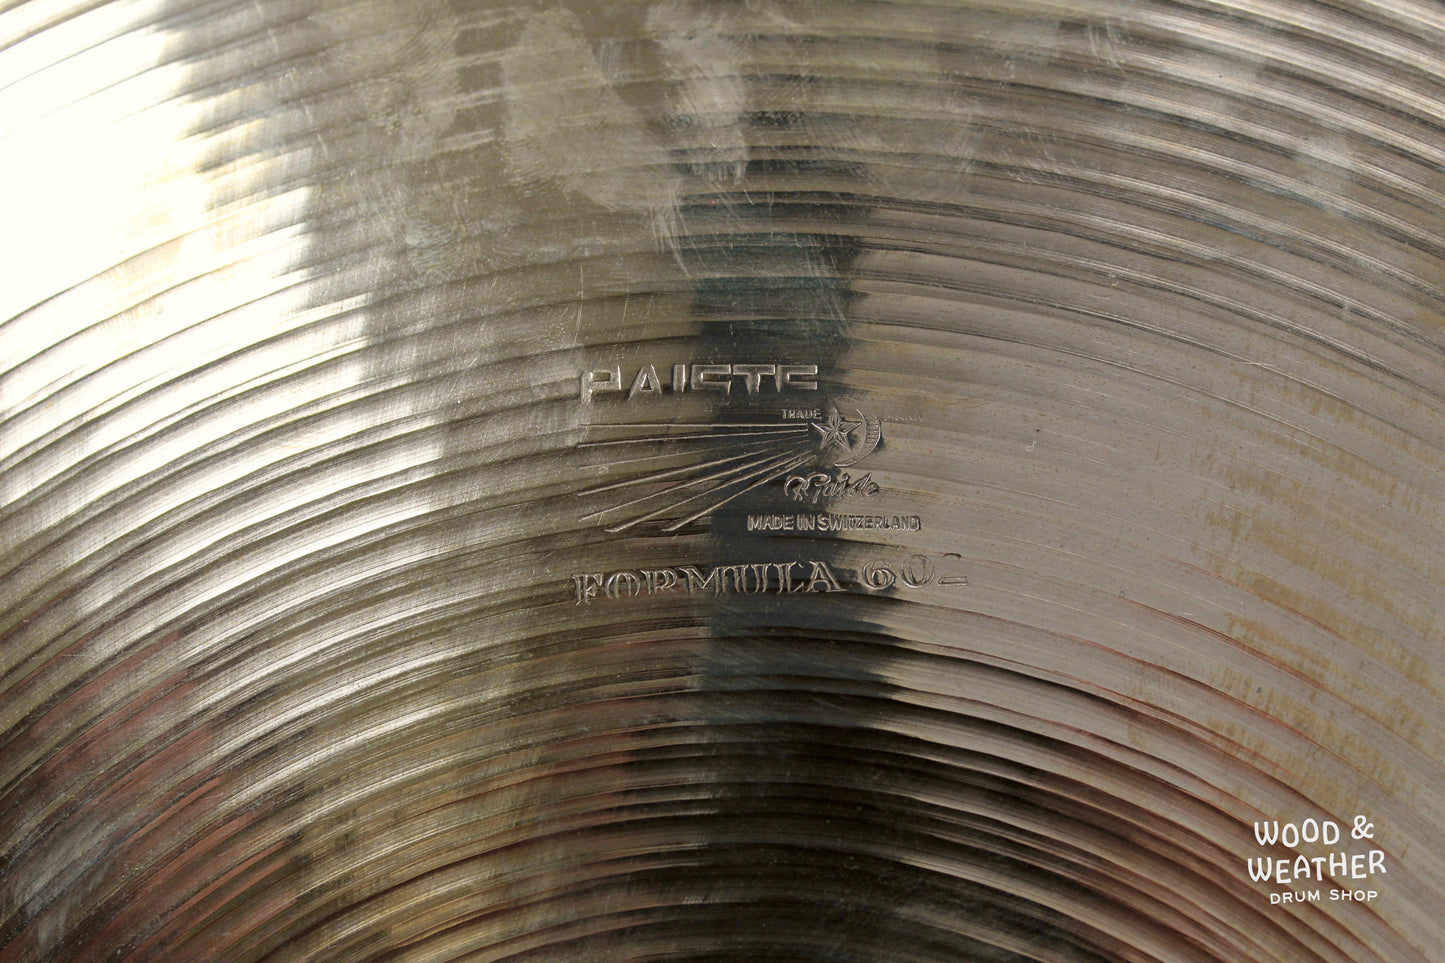 1960s Paiste 18" Solid Stamp Crash Cymbal 1635g